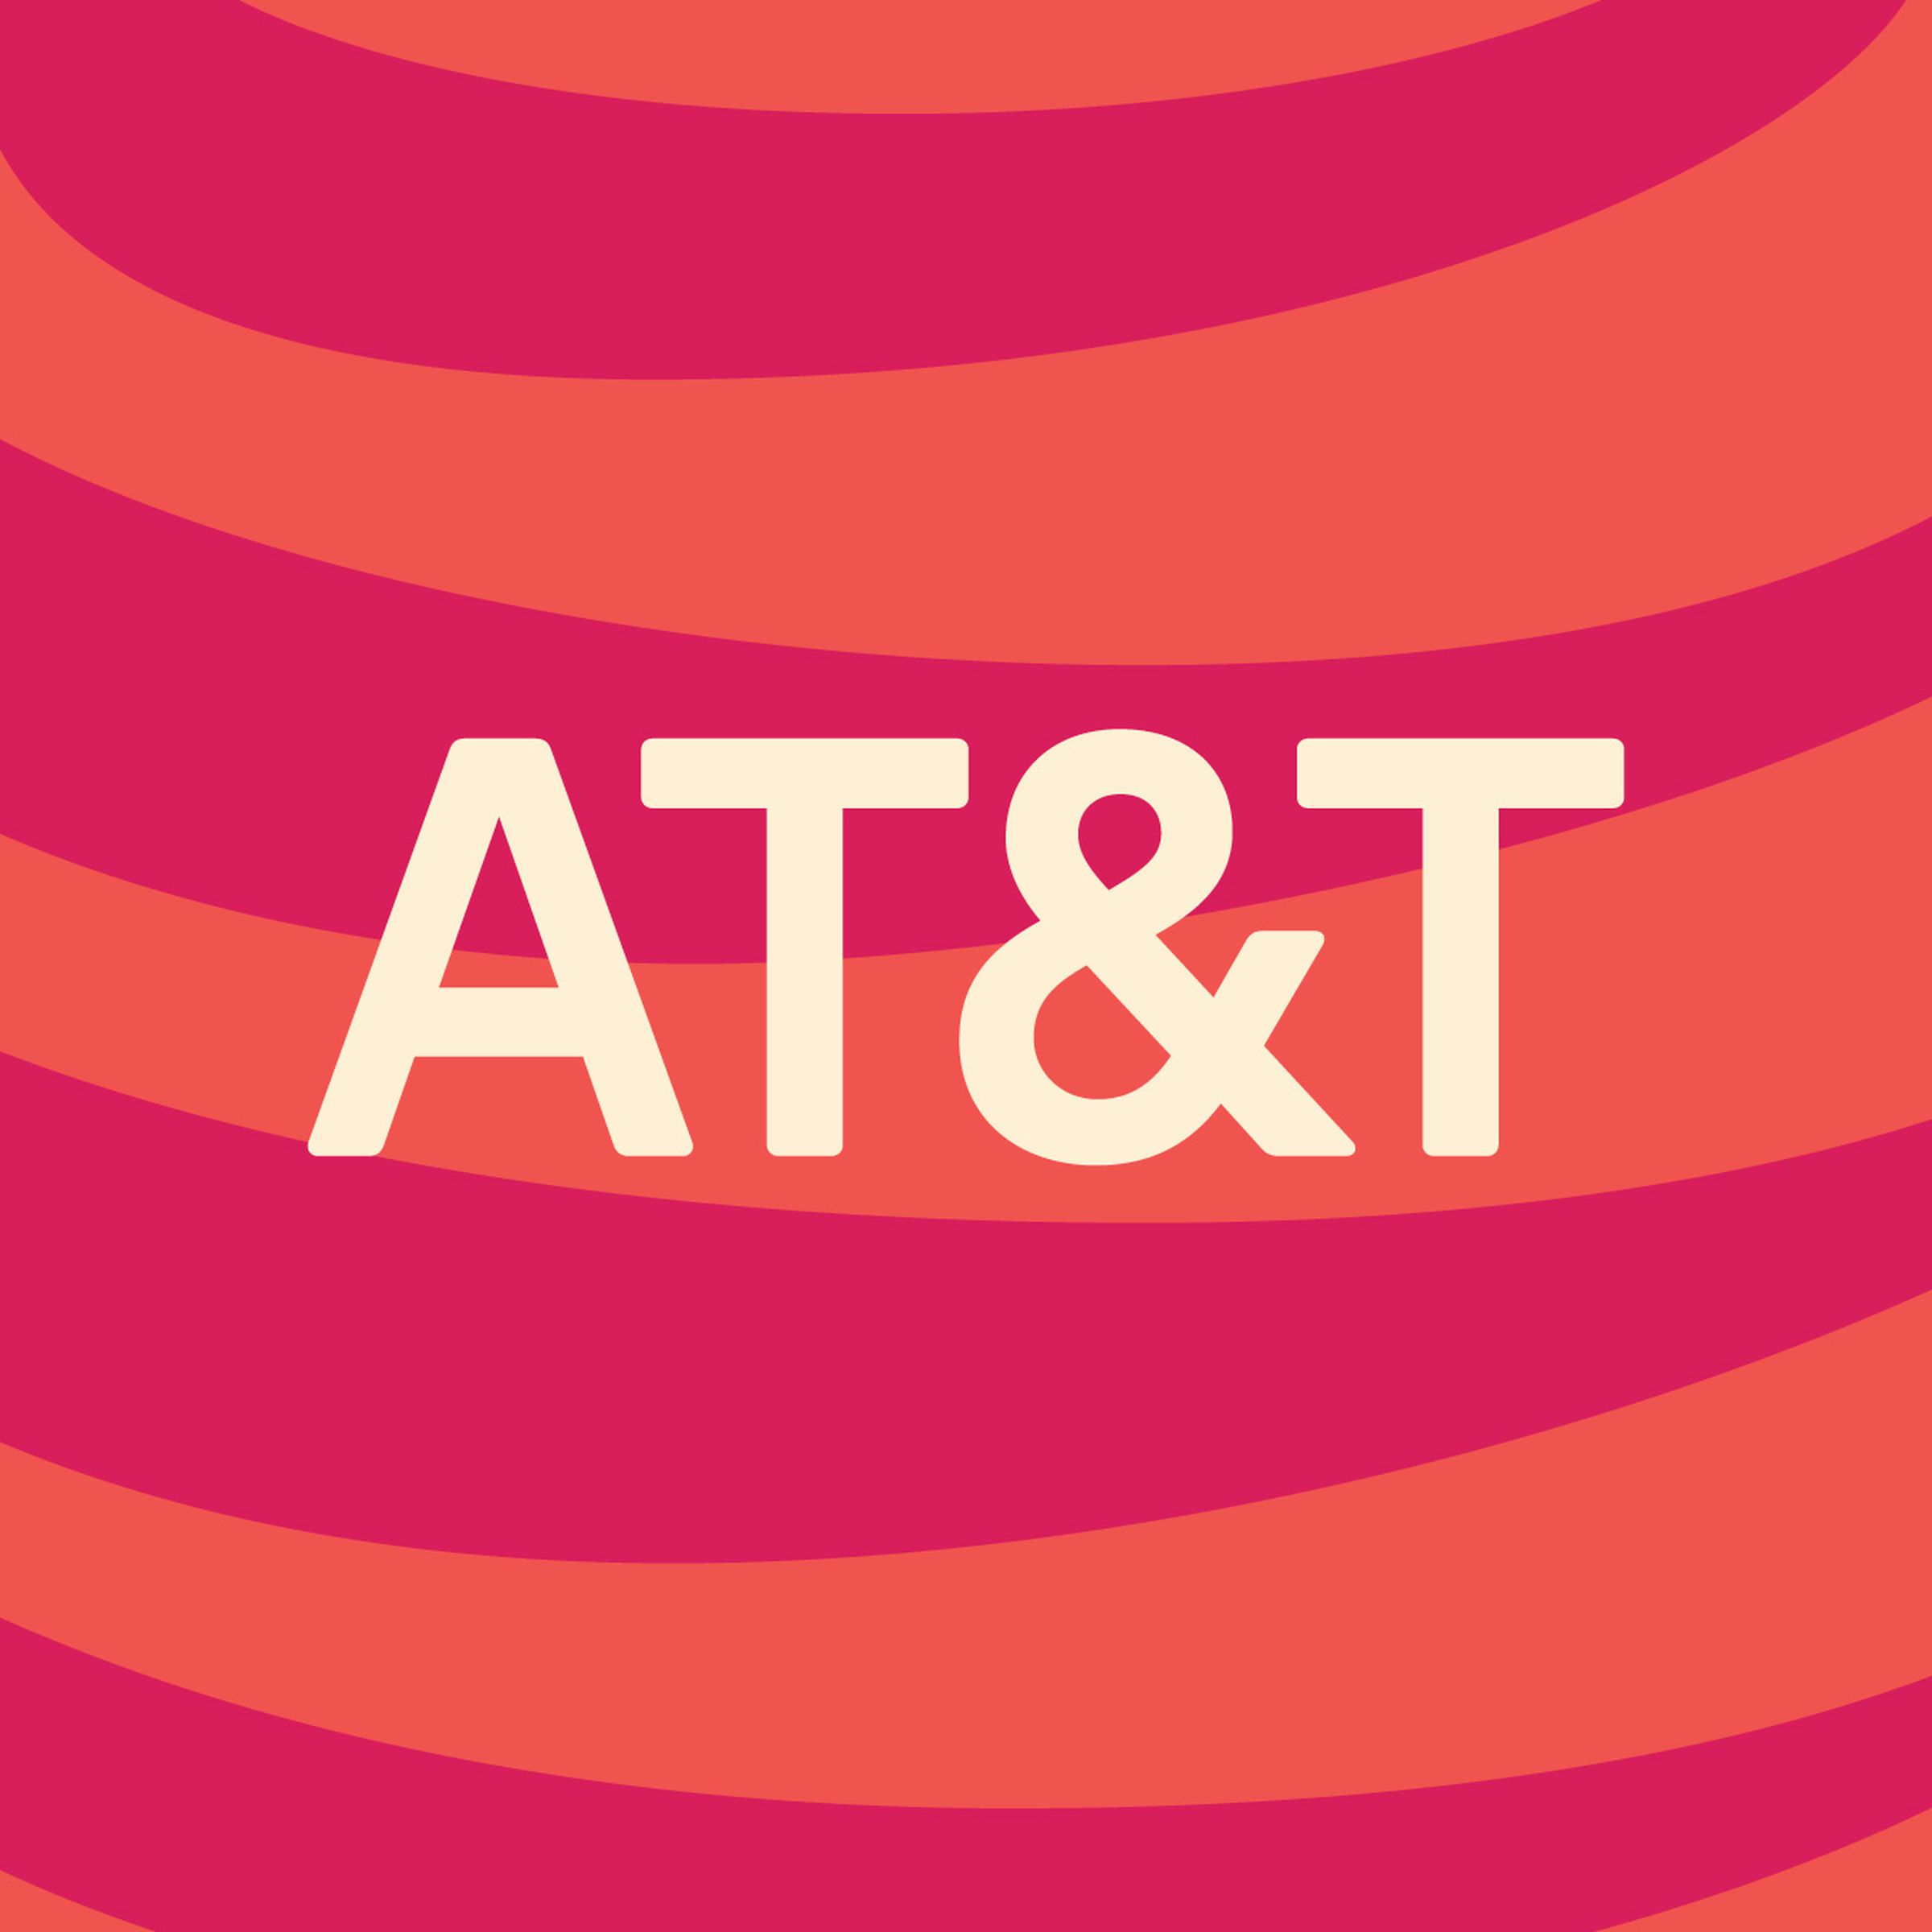 AT&amp;T logo with an illustrated red and orange background.